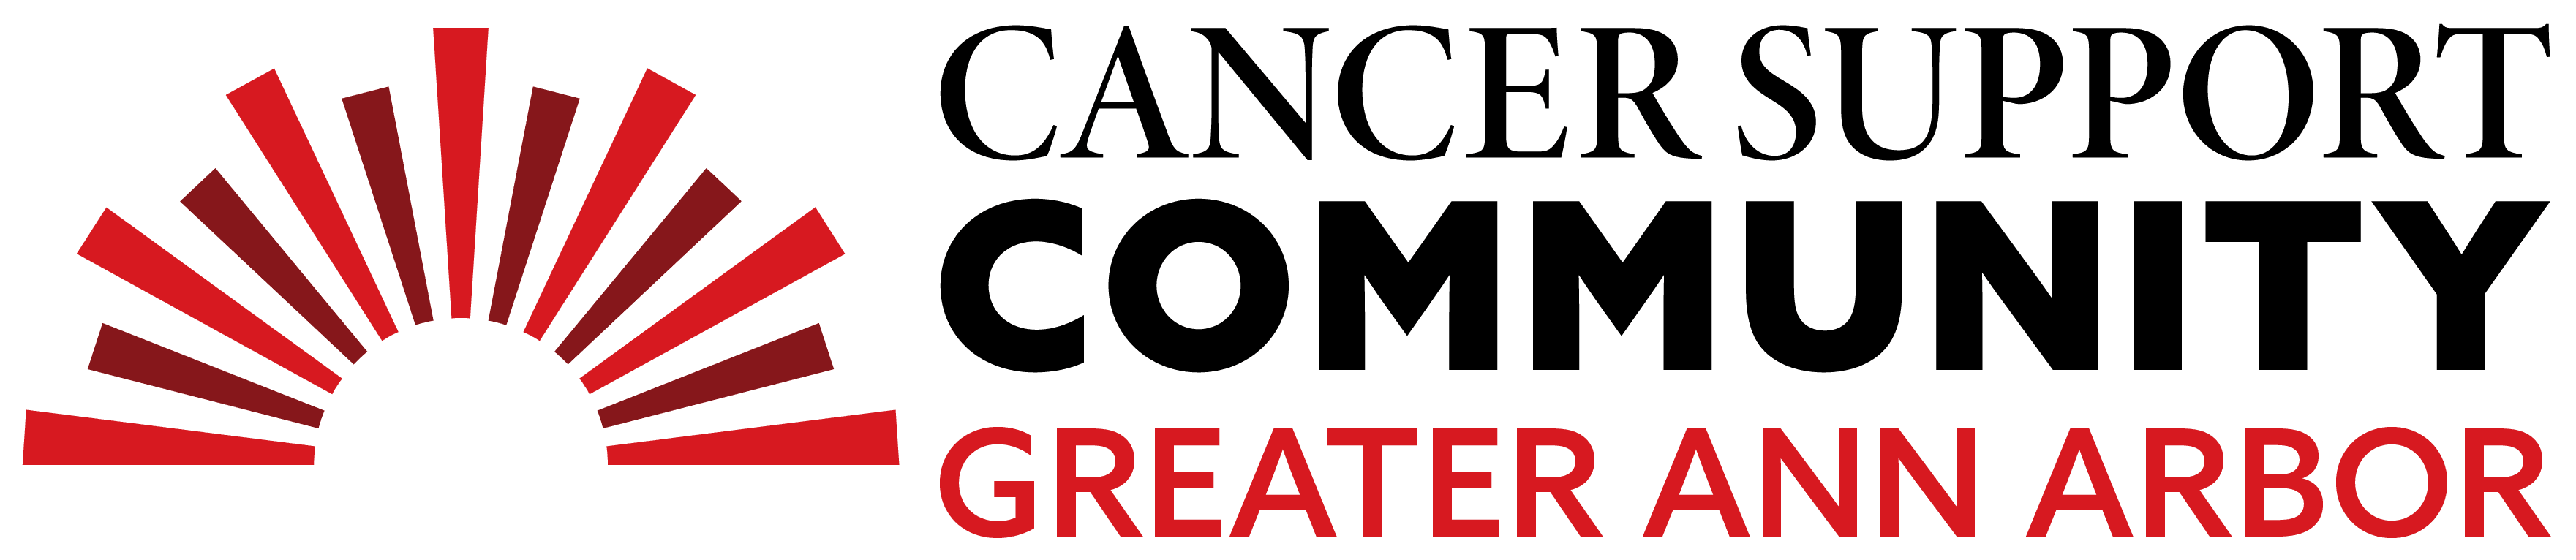 Cancer Support Community of Greater Ann Arbor Logo